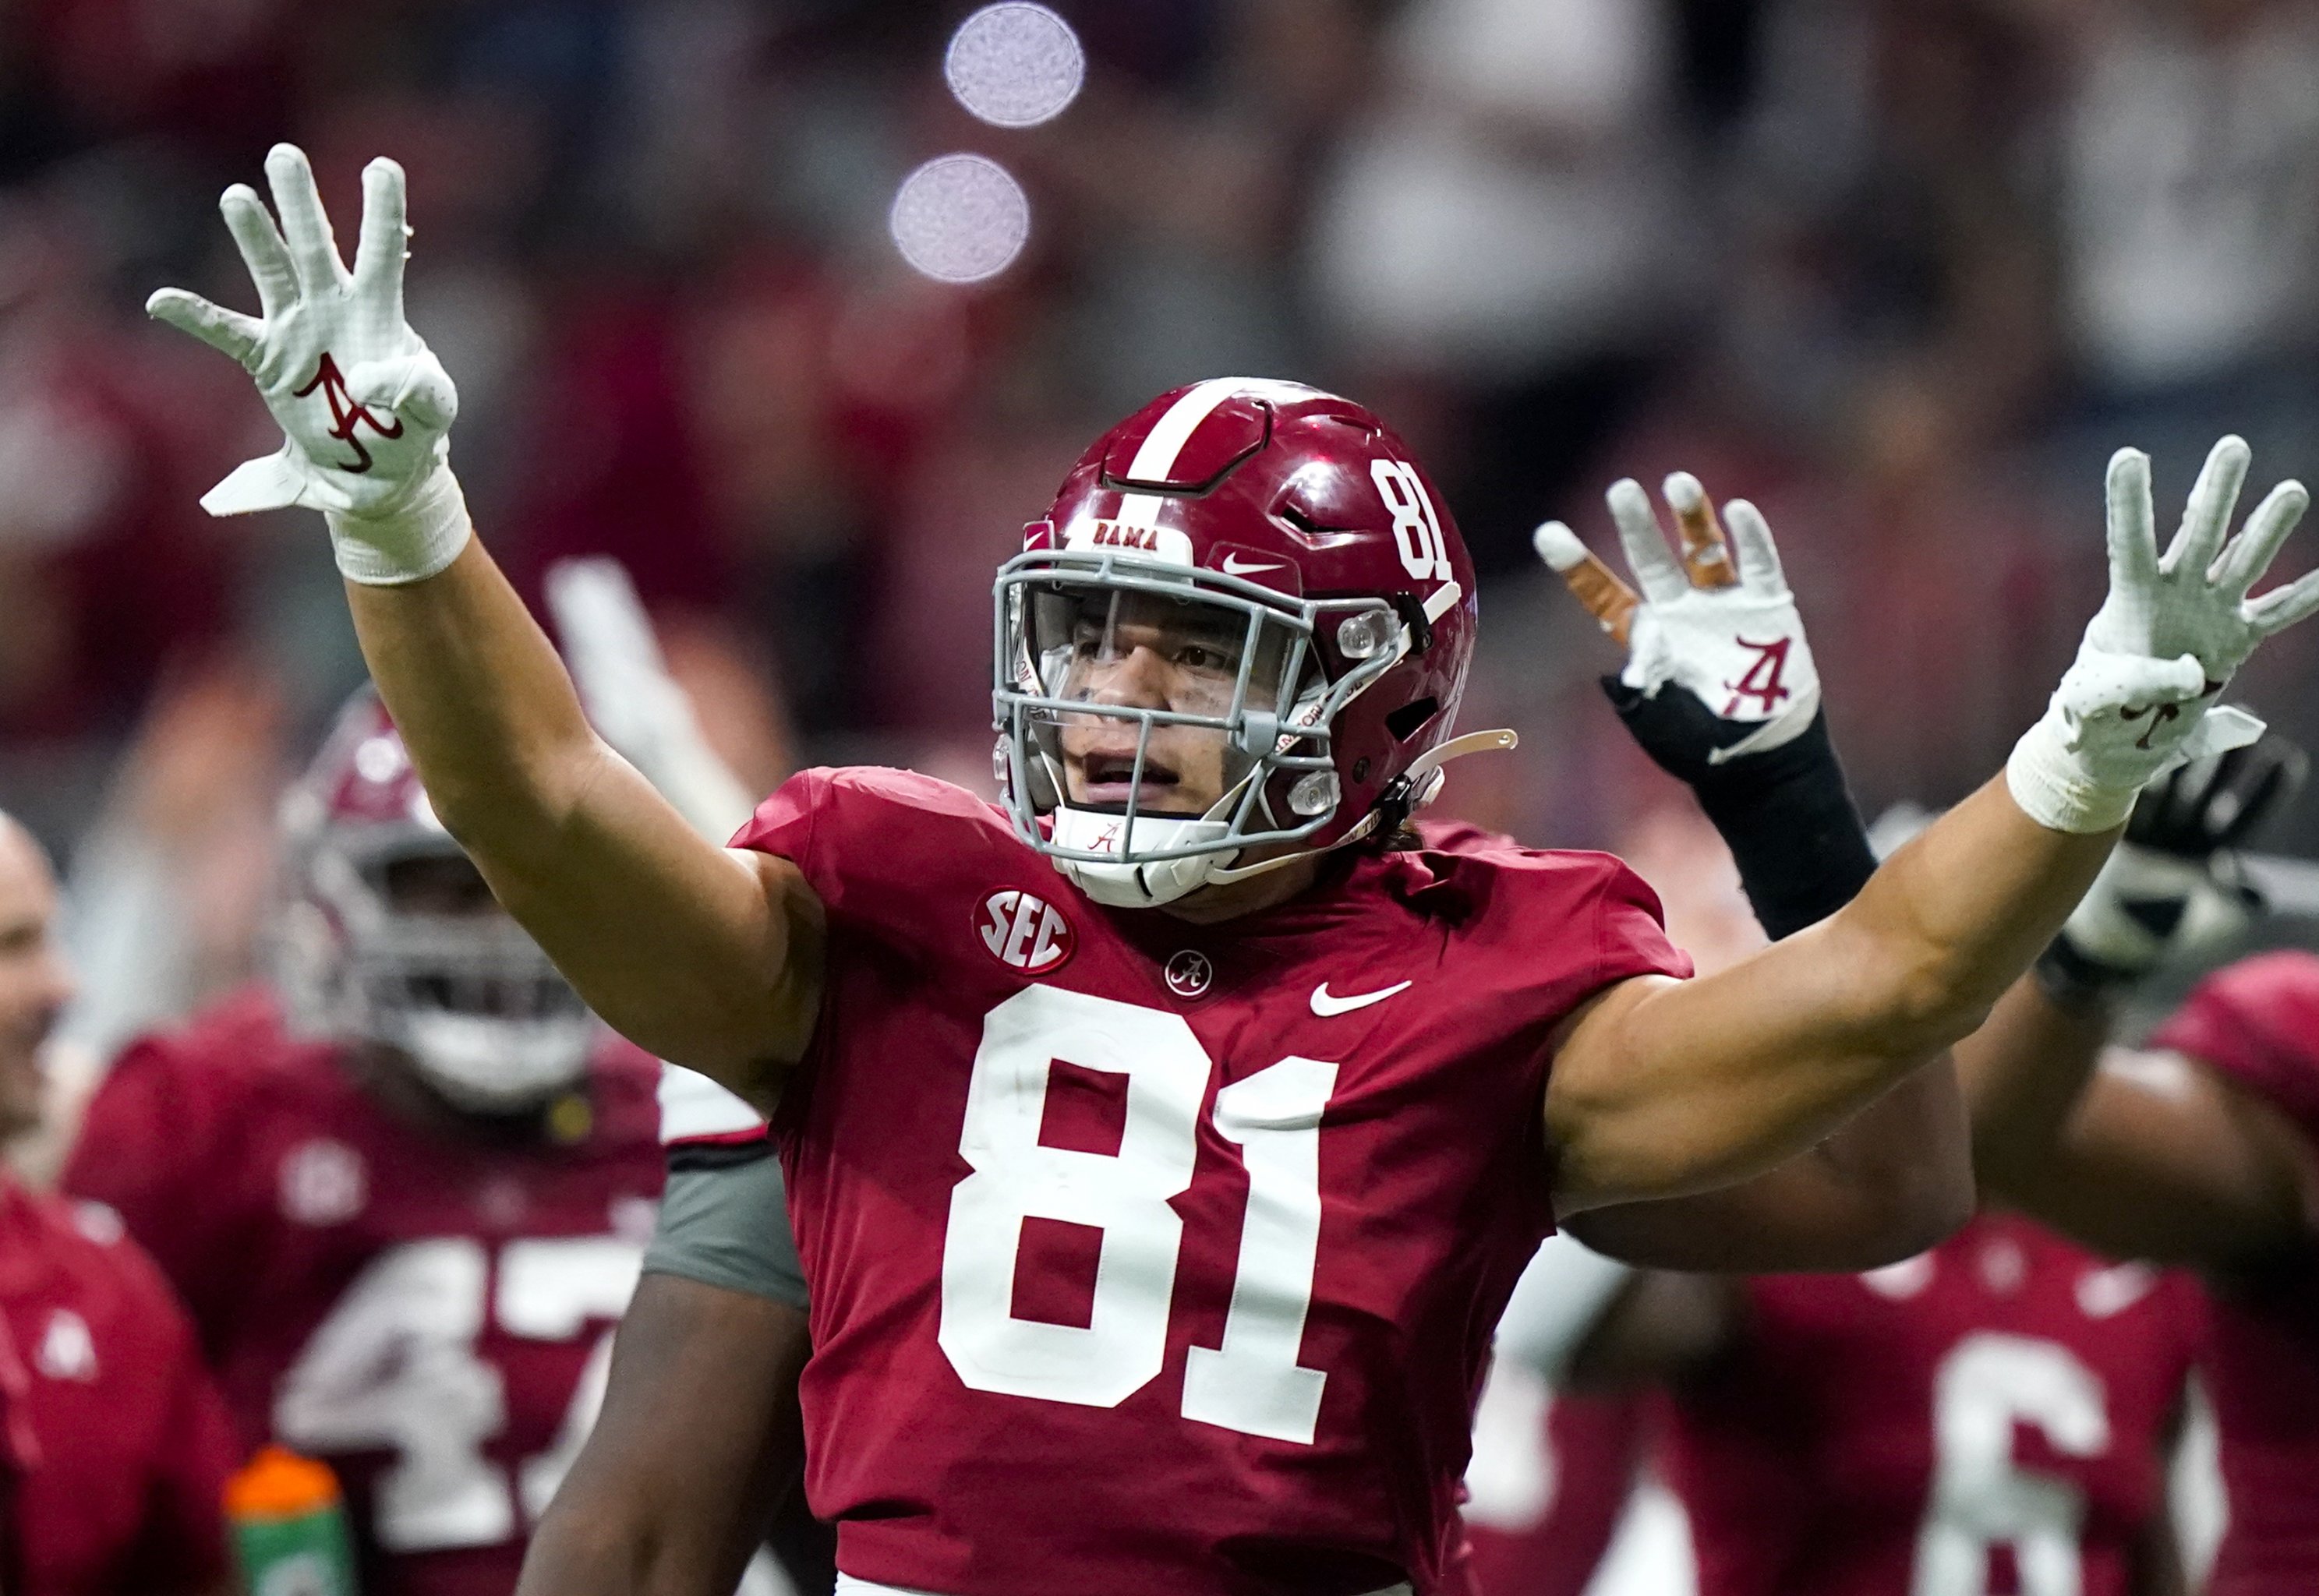 Ncaa Bowl Schedule 2022 Bowl Games 2021-22 Printable Schedule, Latest Odds And Picks For Every  Matchup | Bleacher Report | Latest News, Videos And Highlights